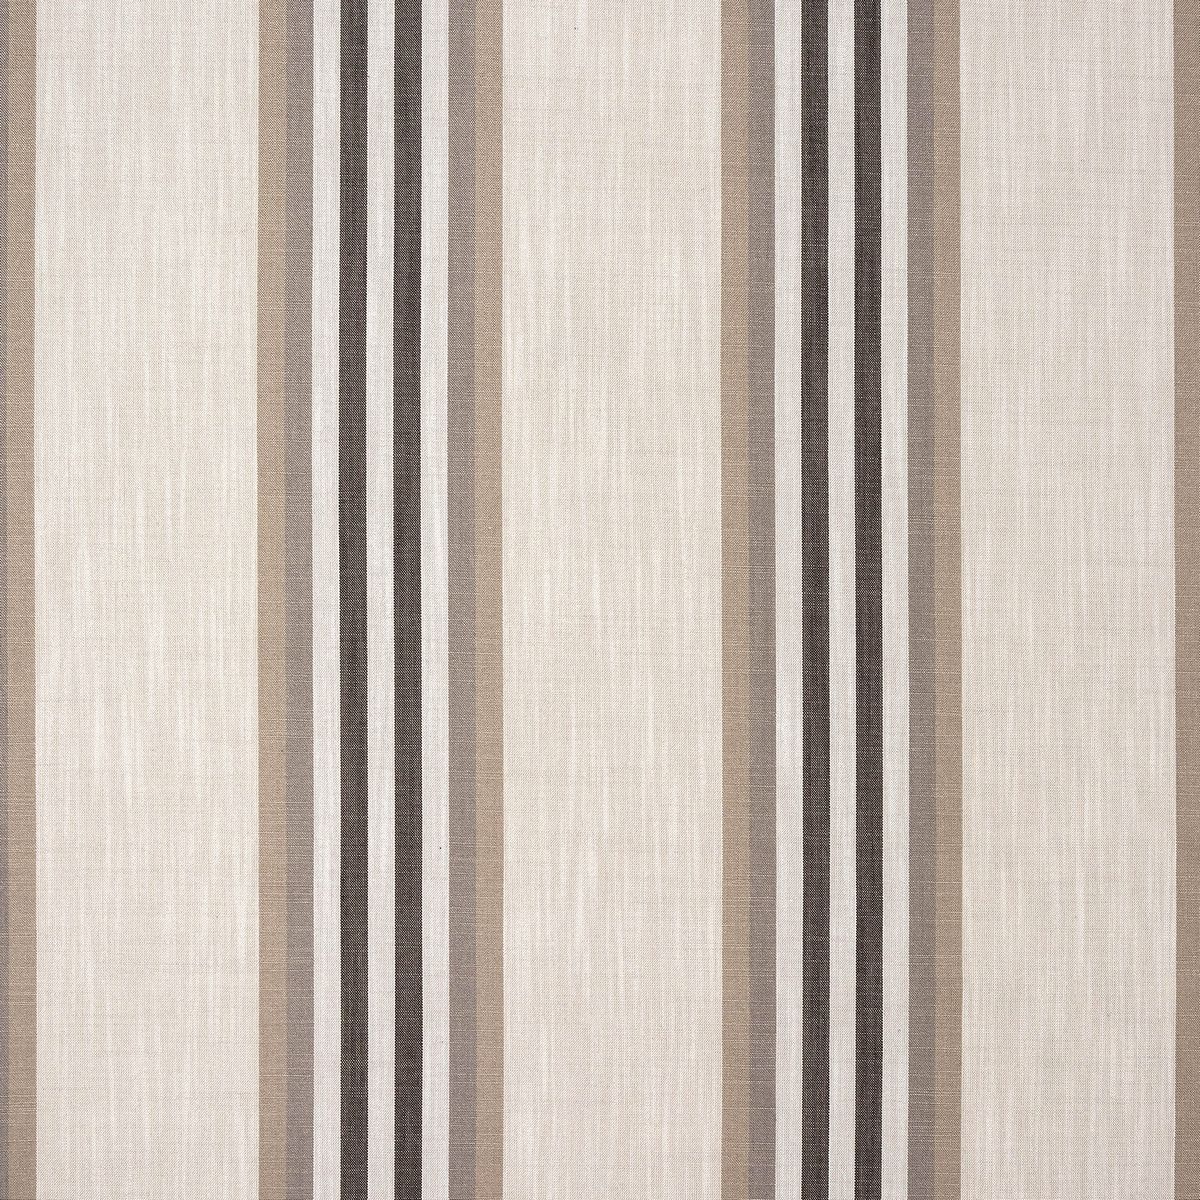 Manali Stripe Taupe Fabric by Porter & Stone